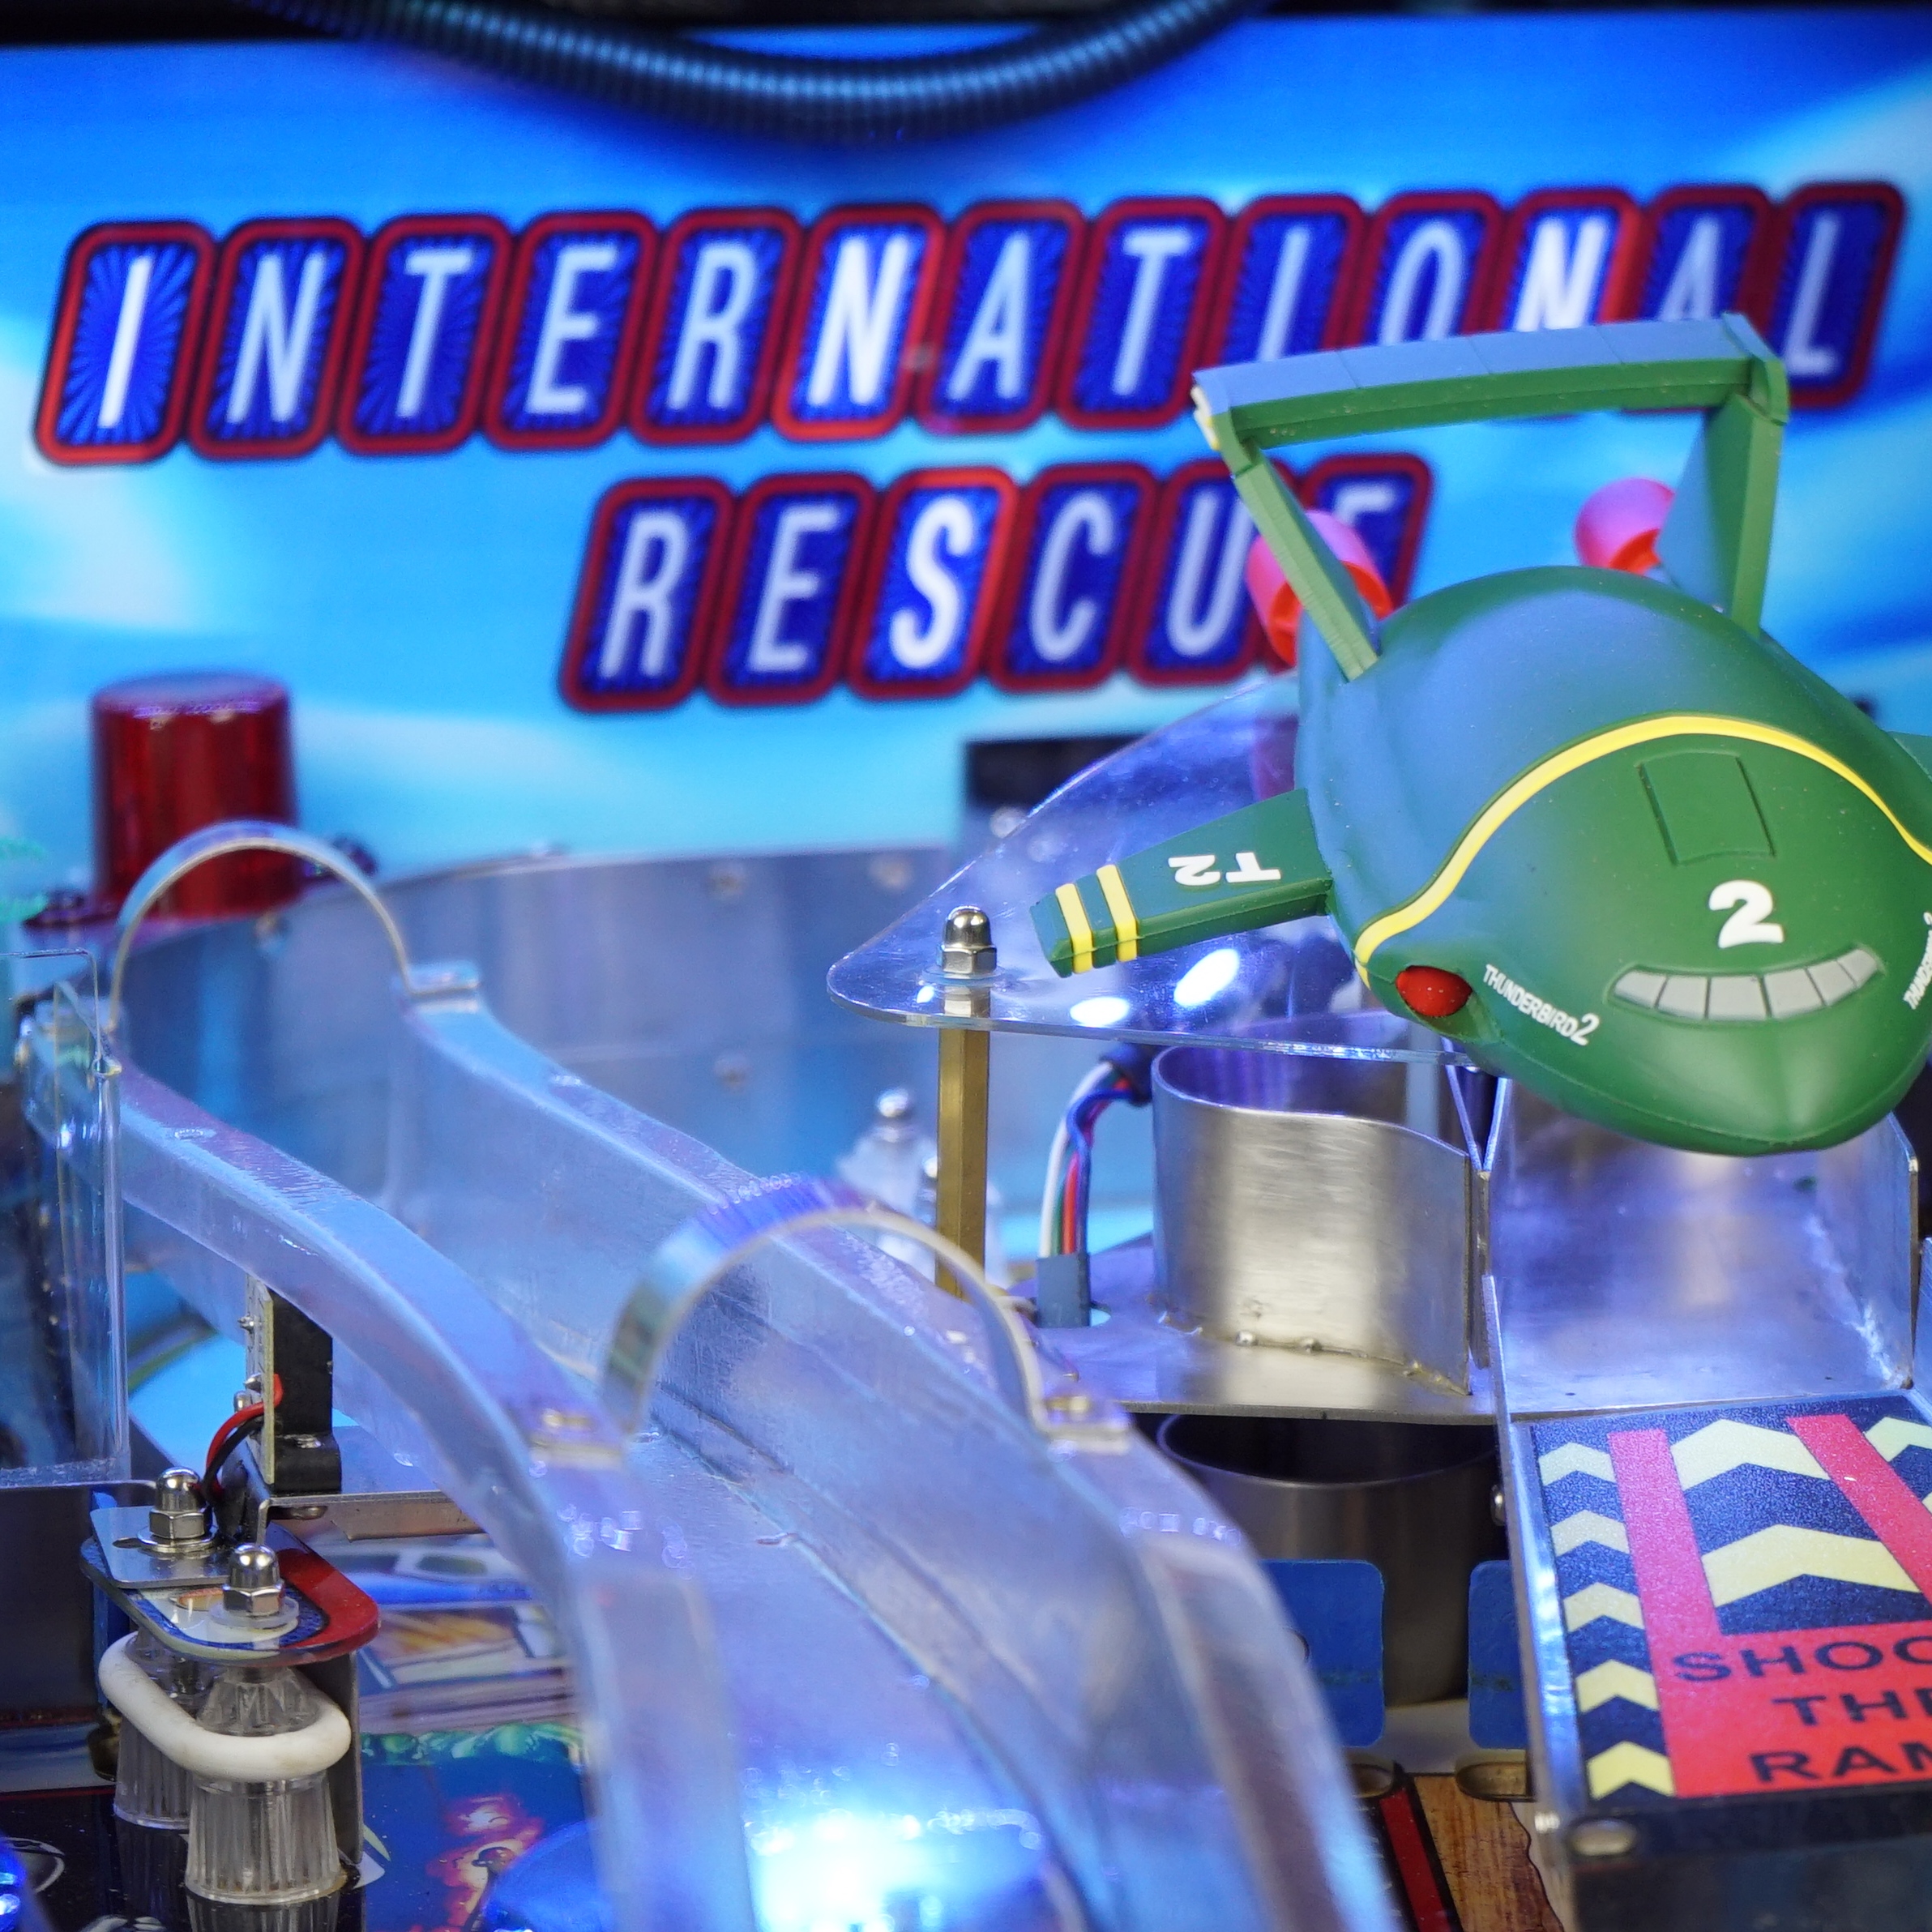 Mission 5: Activate International Rescue Signal